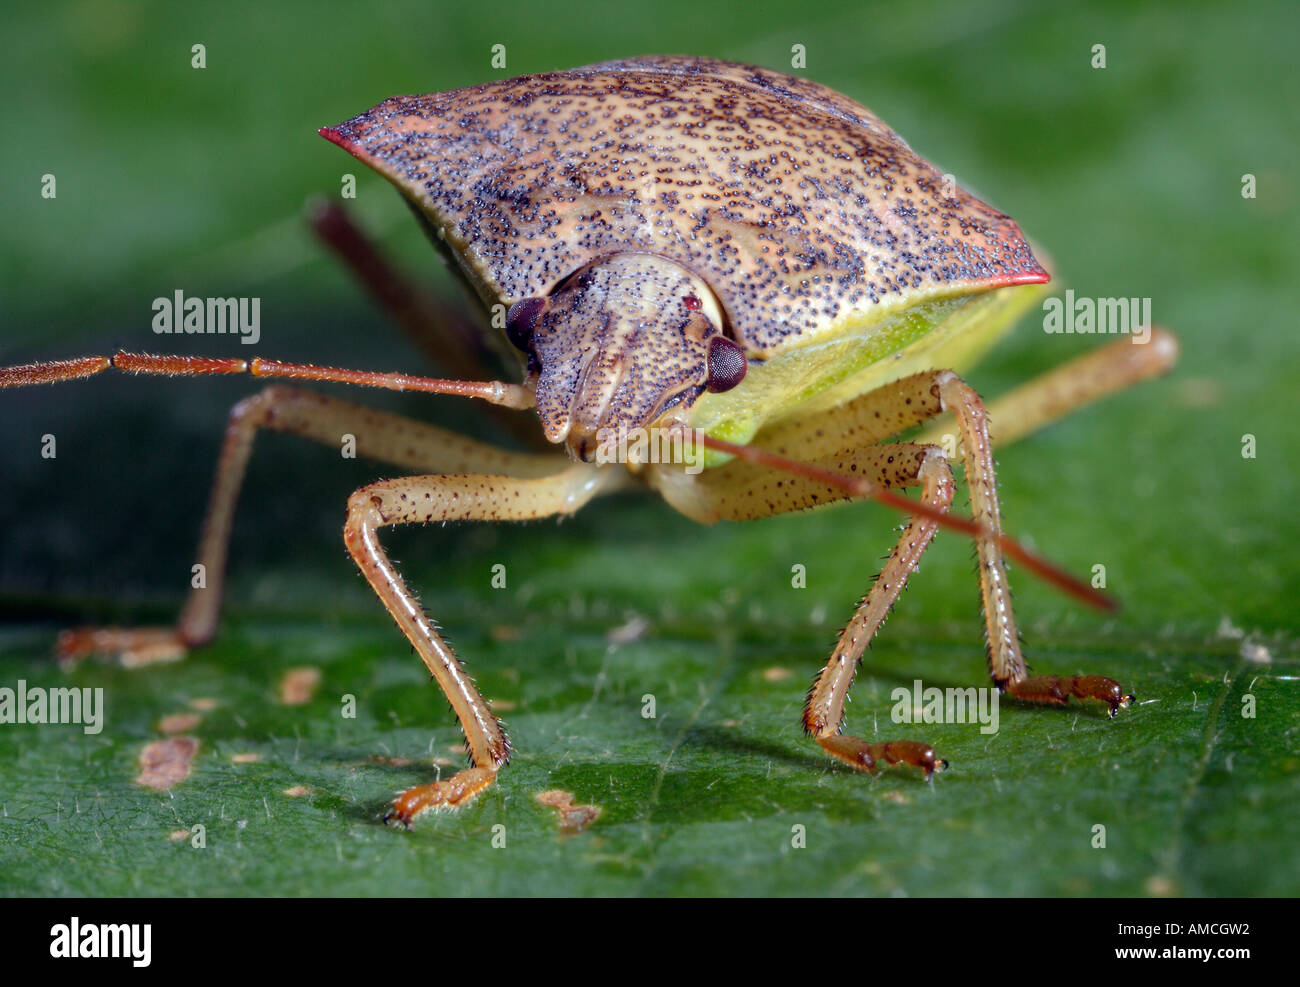 Spined Soldier Bug Podisus maculiventris Foto Stock